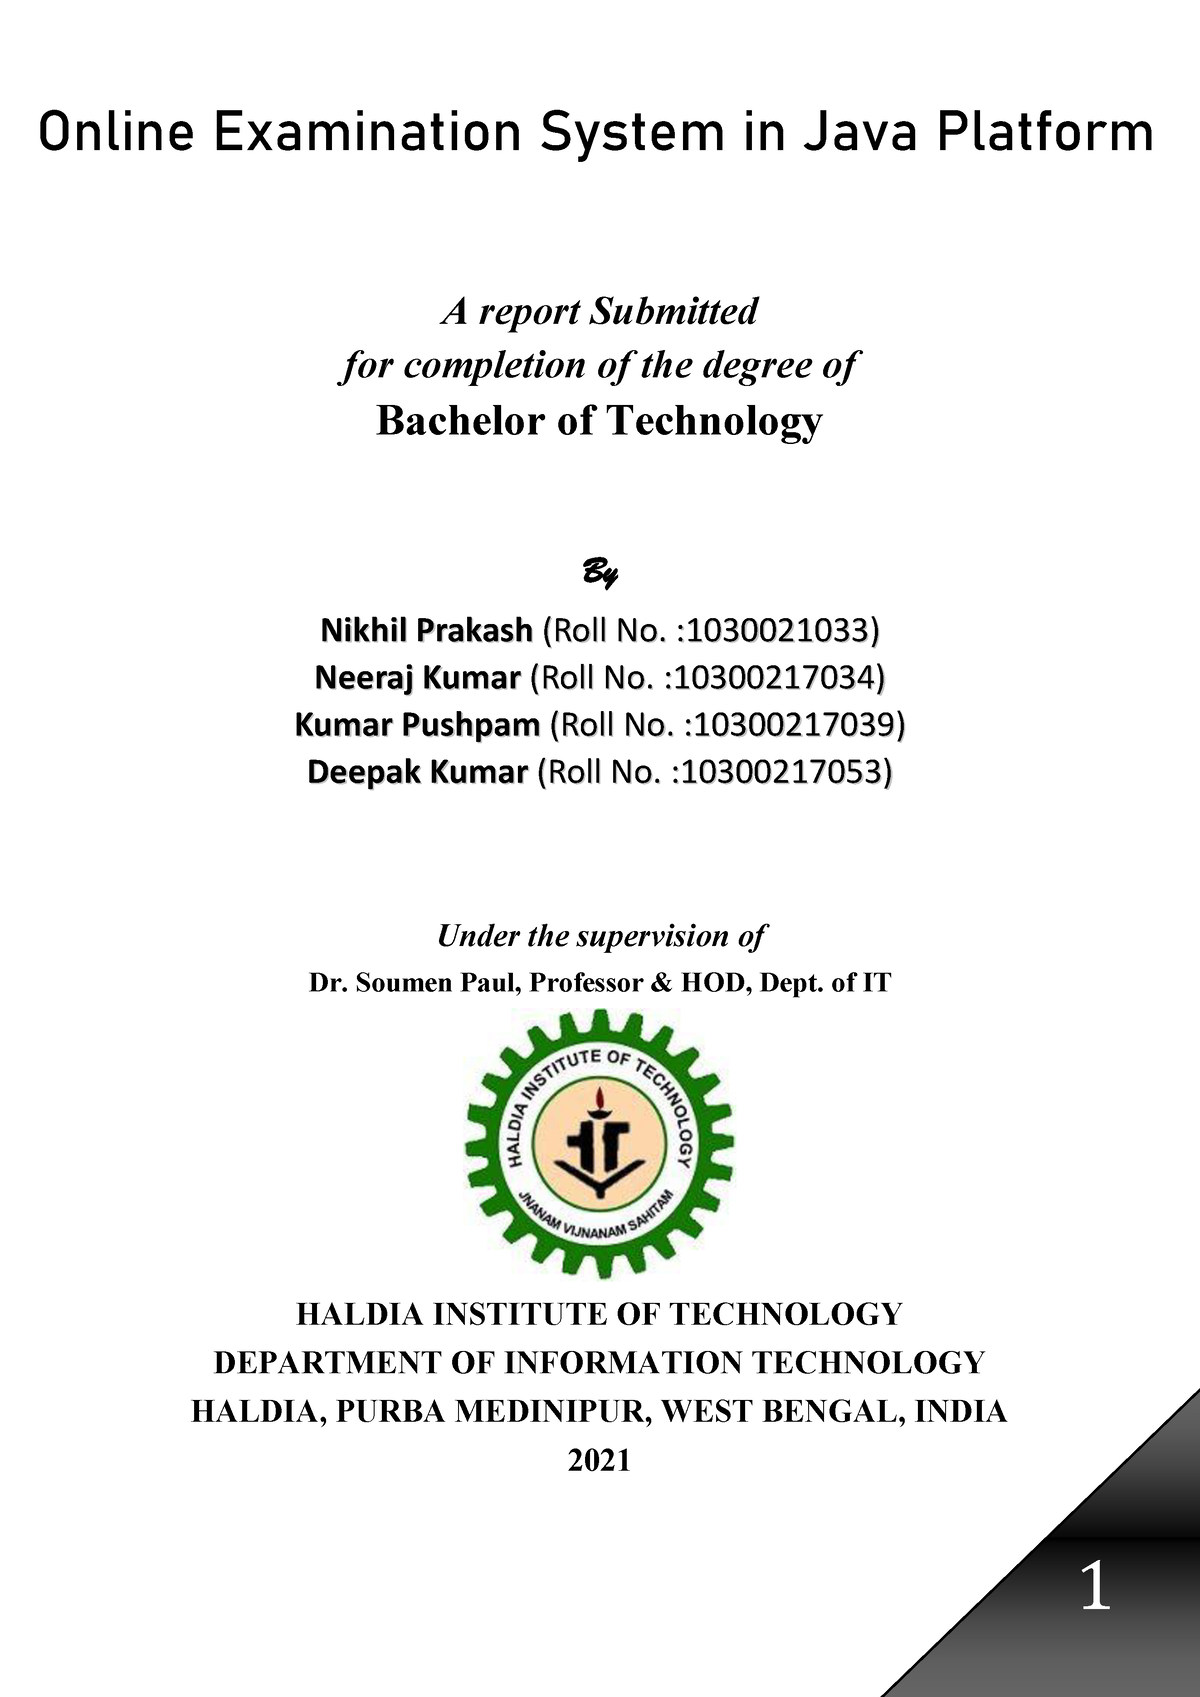 thesis on online examination system